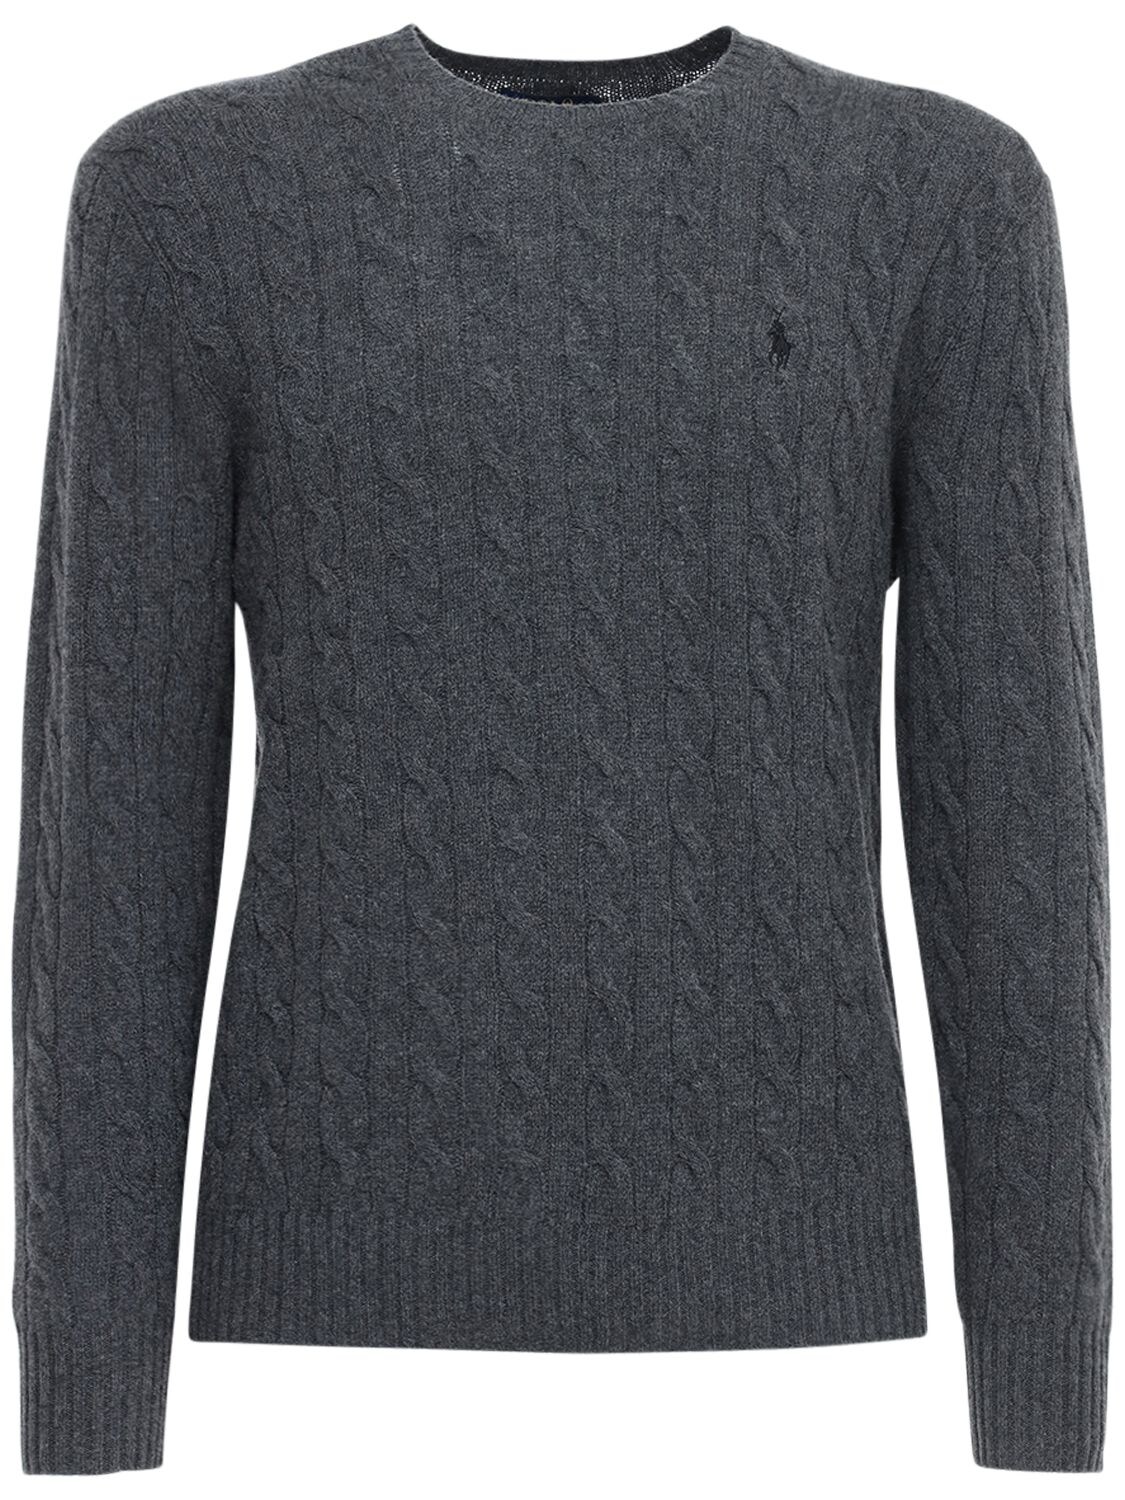 Polo Ralph Lauren Wool & Cashmere Knit Sweater In Charcoal